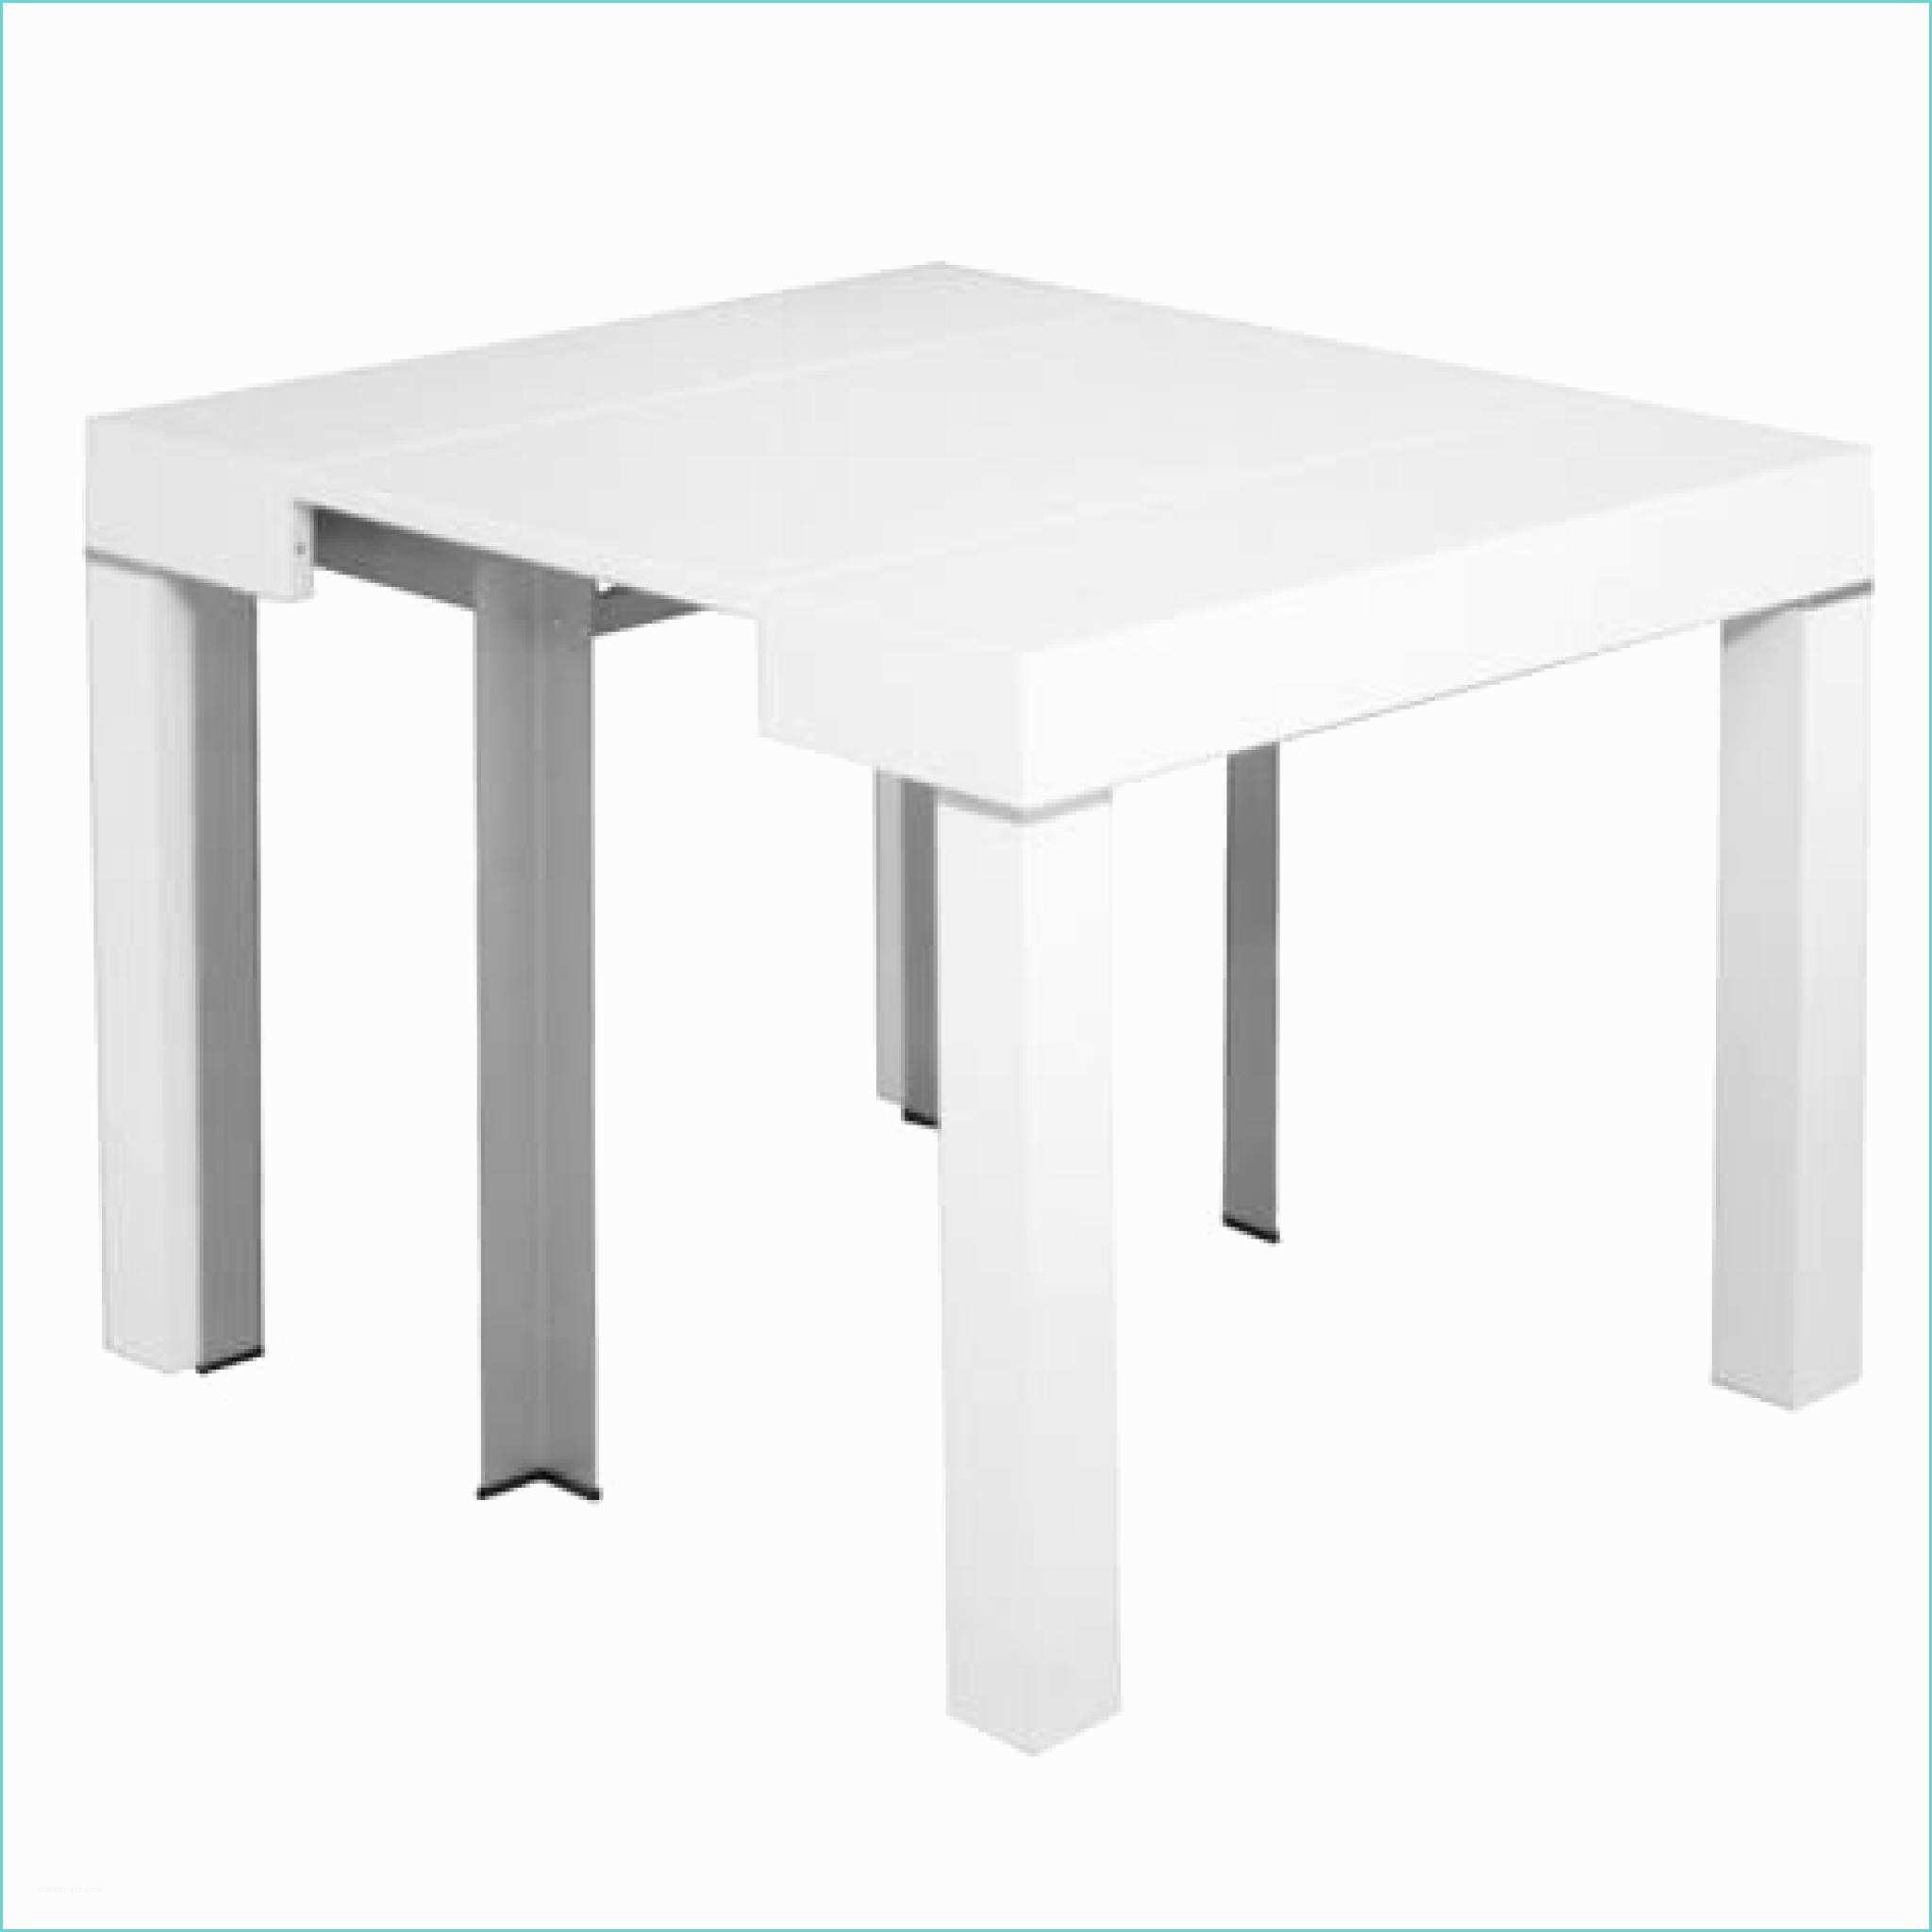 Table Ovale Extensible Blanche Table Blanche Extensible Maison Design Wiblia